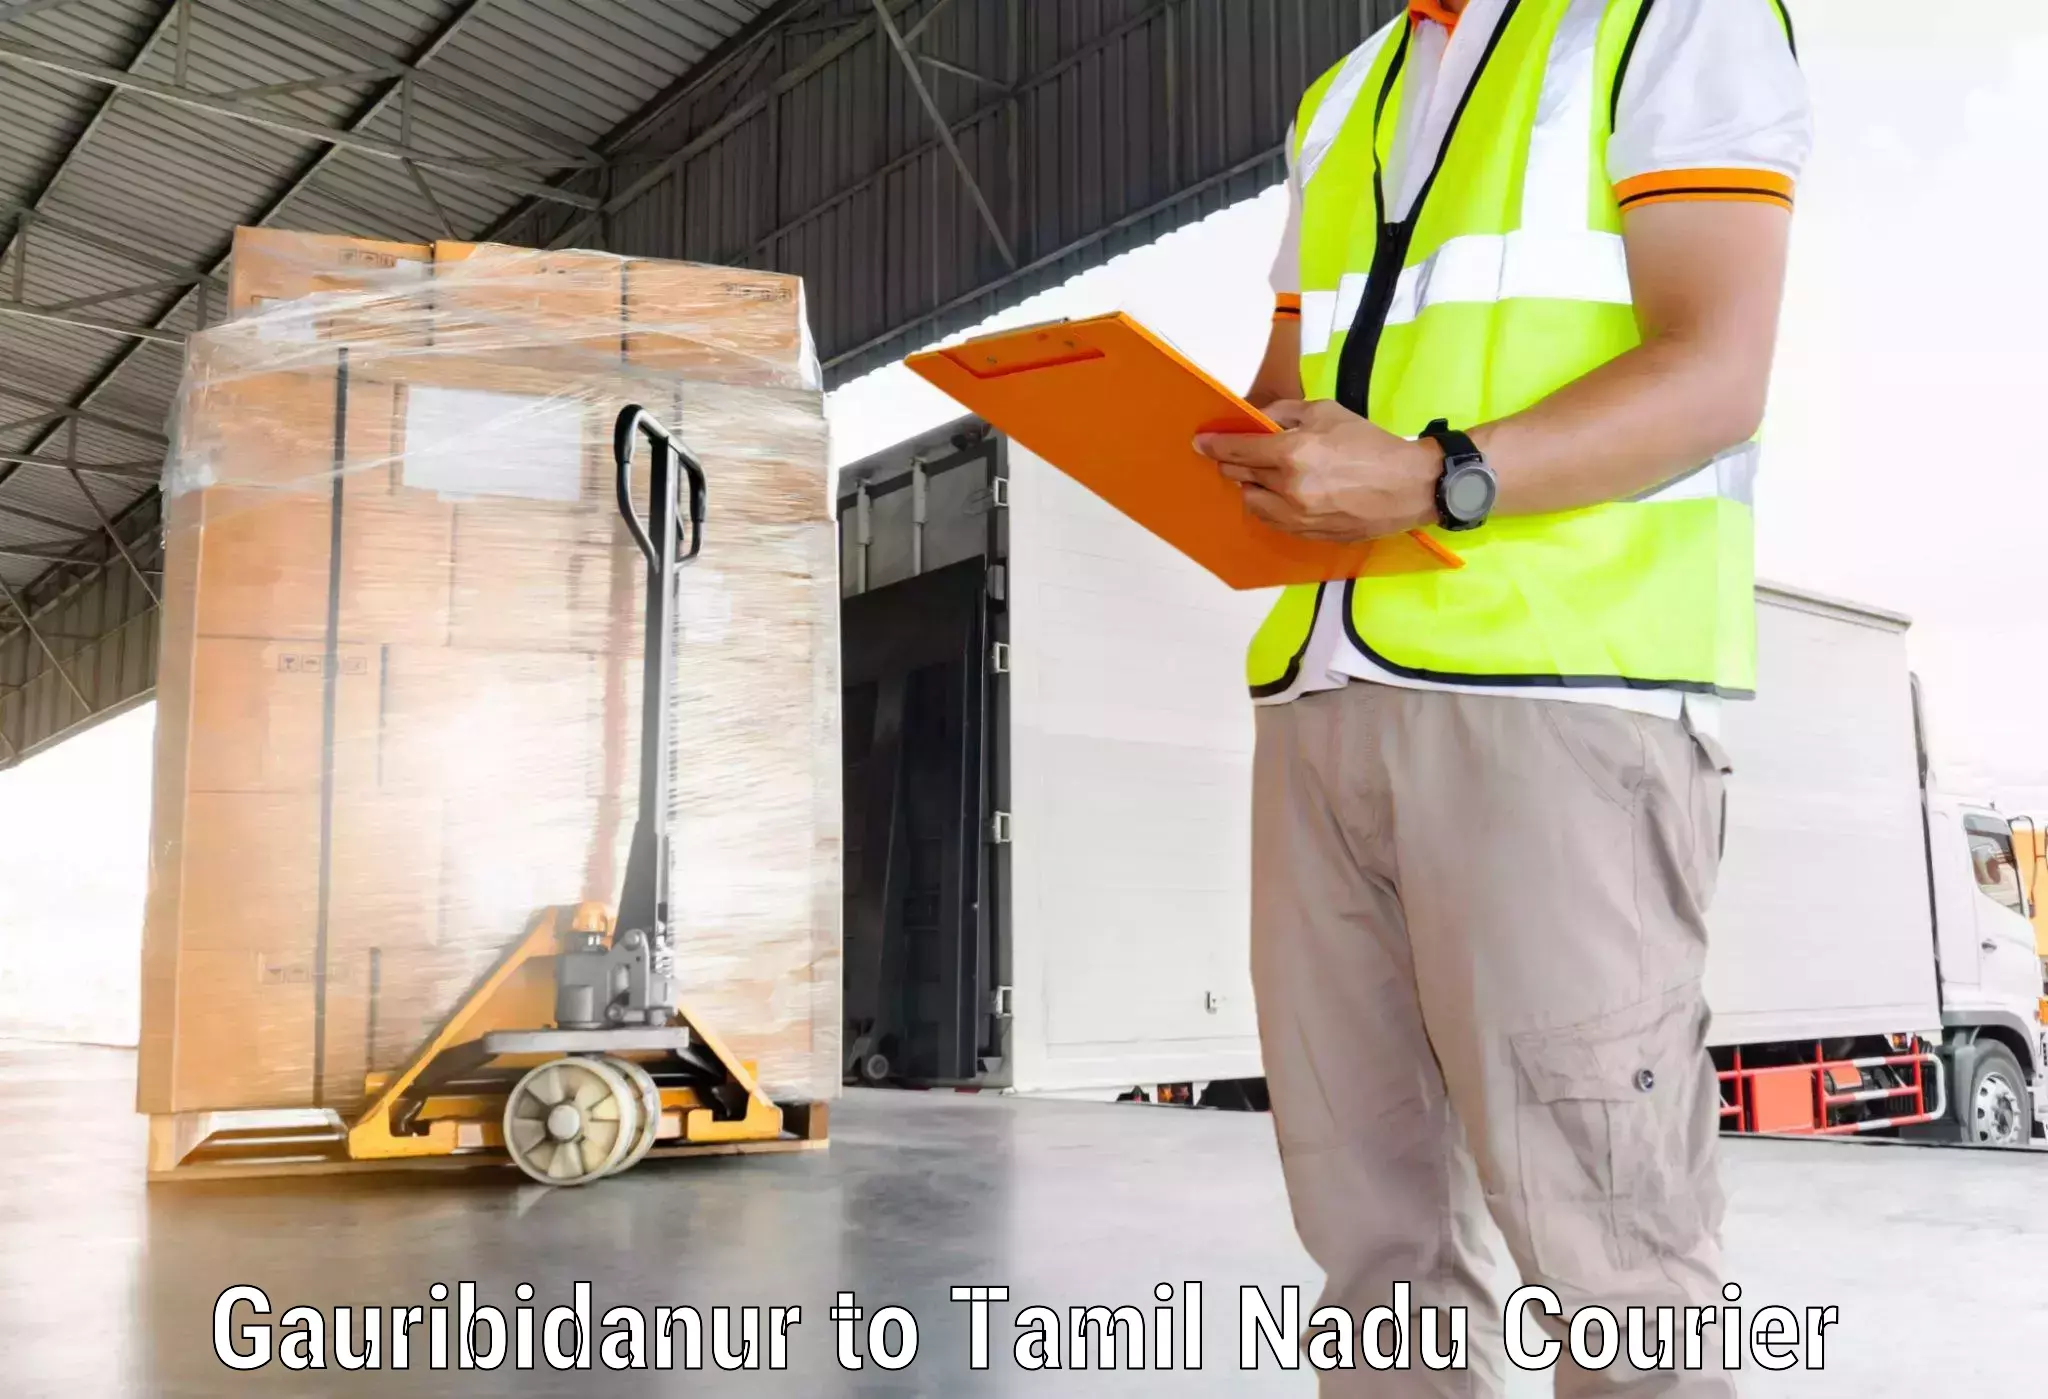 Package delivery network Gauribidanur to Thuraiyur